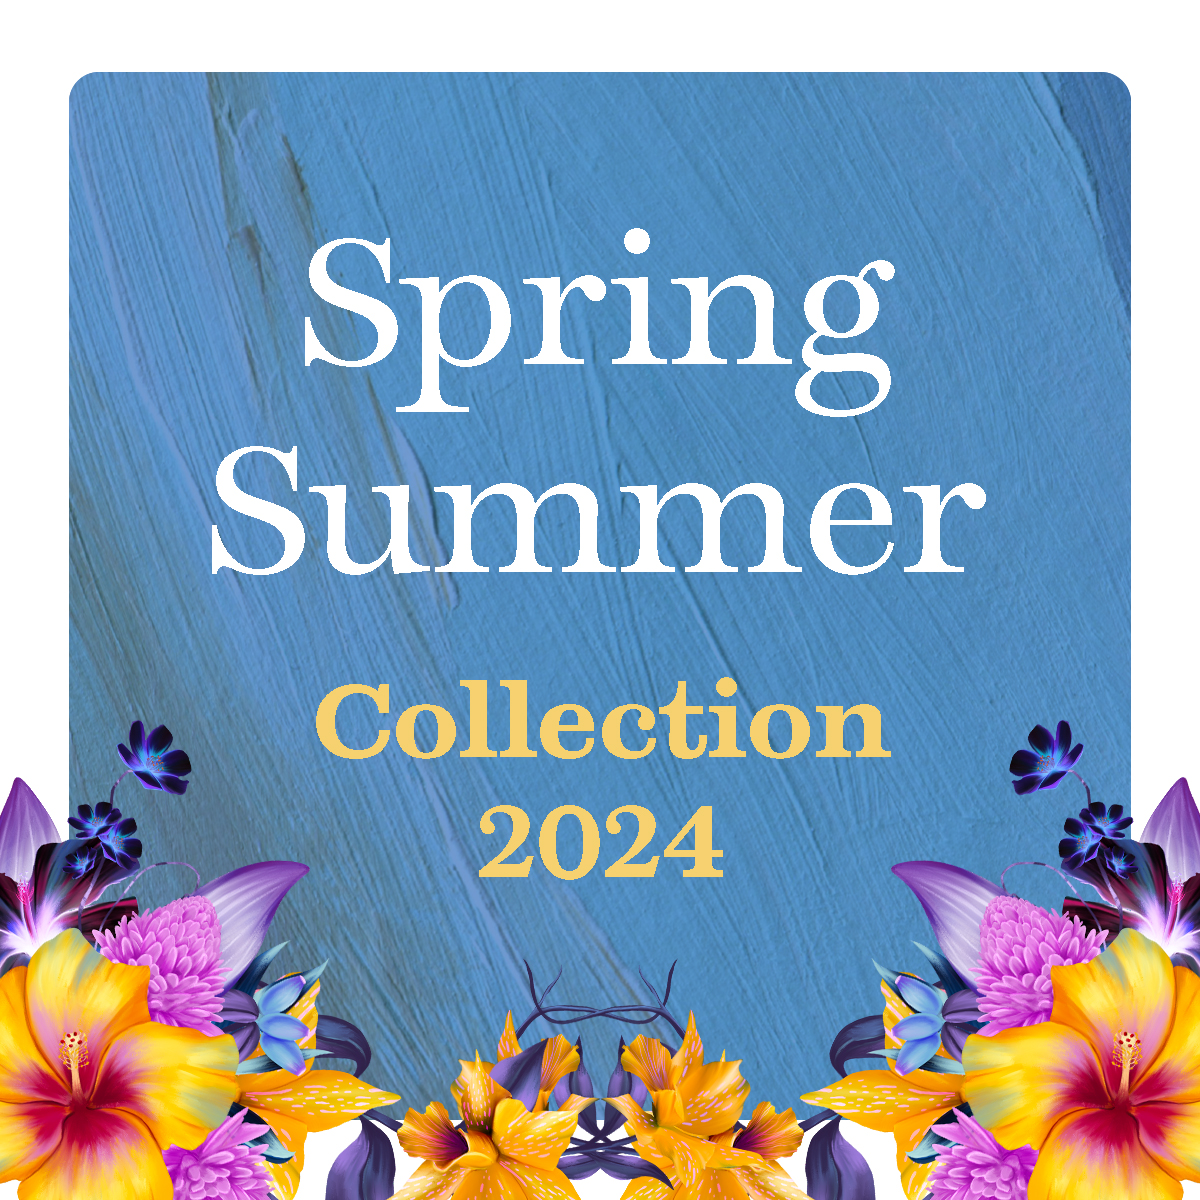 Spring Summer Collection 2024